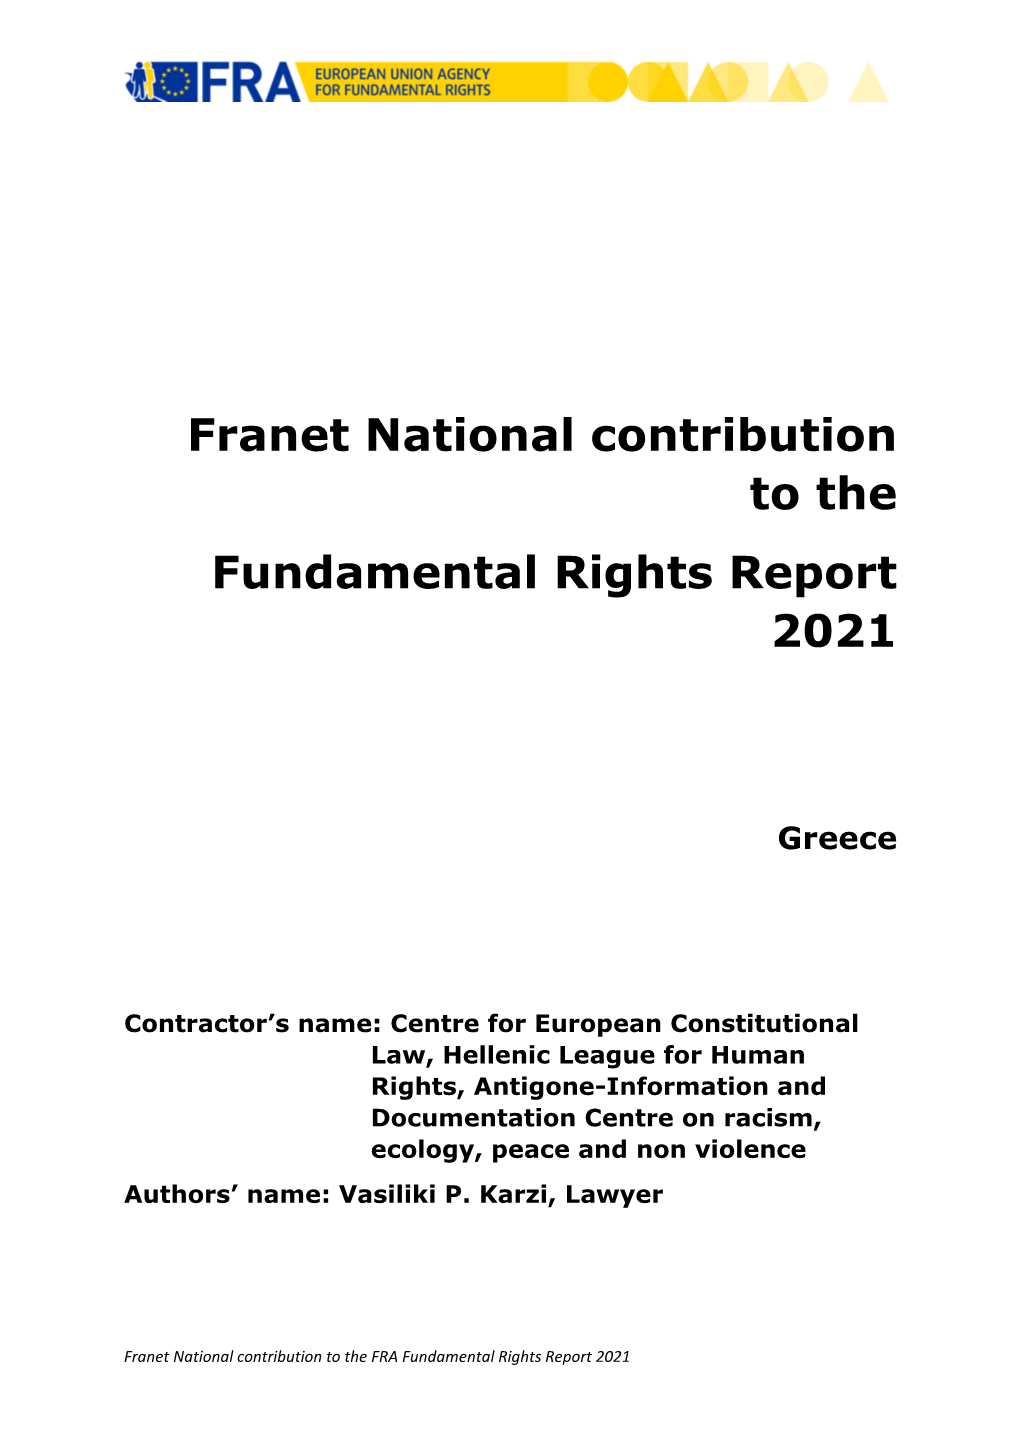 Franet National Contribution to the Fundamental Rights Report 2021